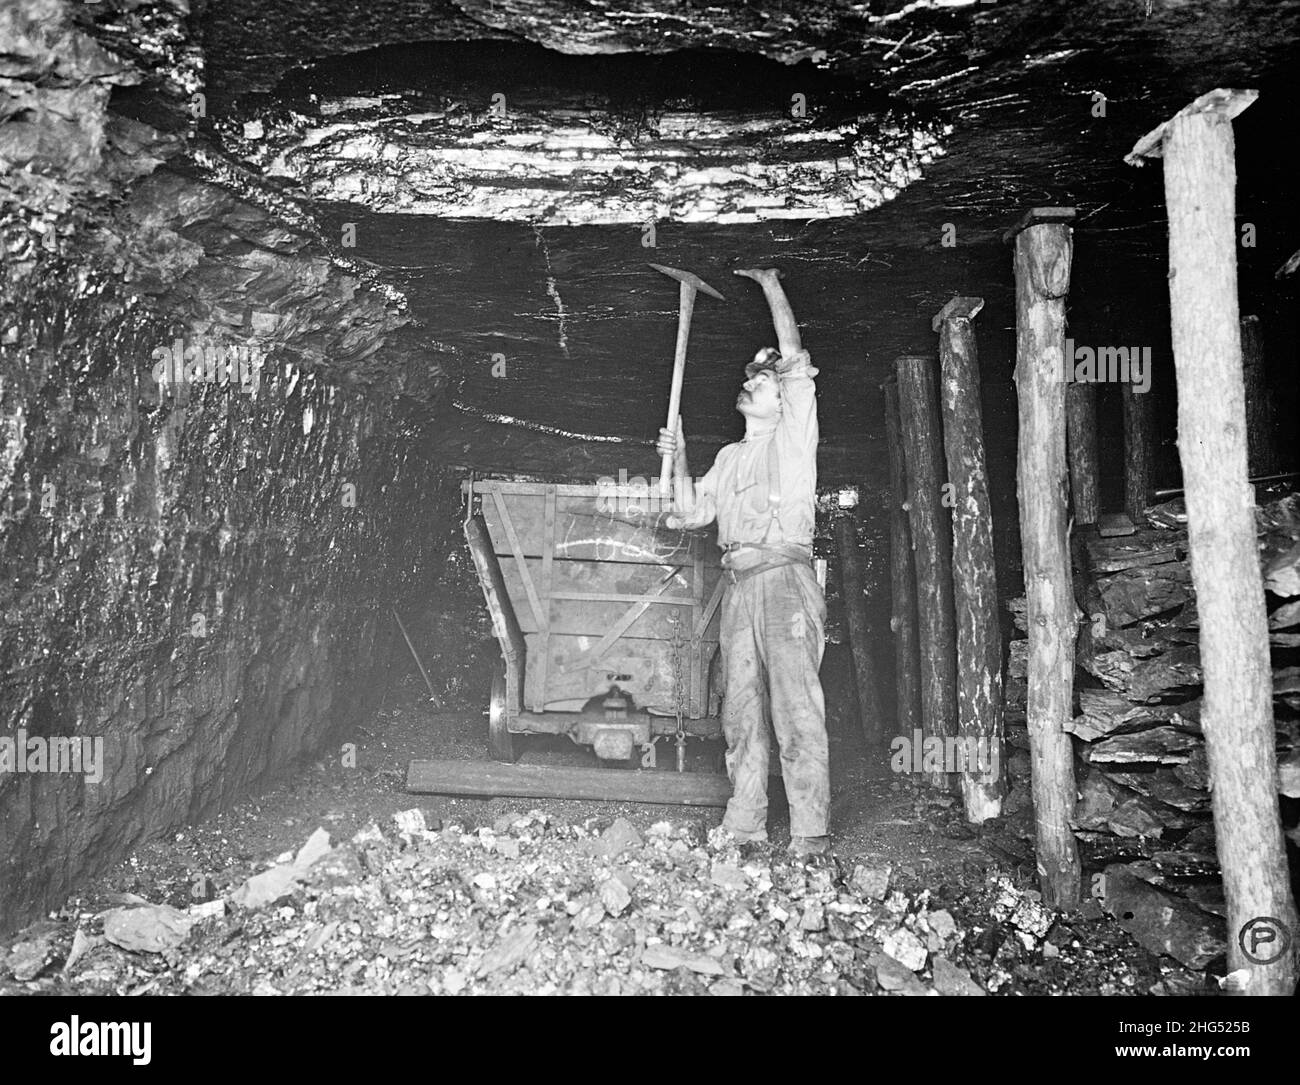 Coal miner using a pick next to a coal wagon in an American coal mine circa 1910 showing the dirty and cramped conditions they worked in Stock Photo